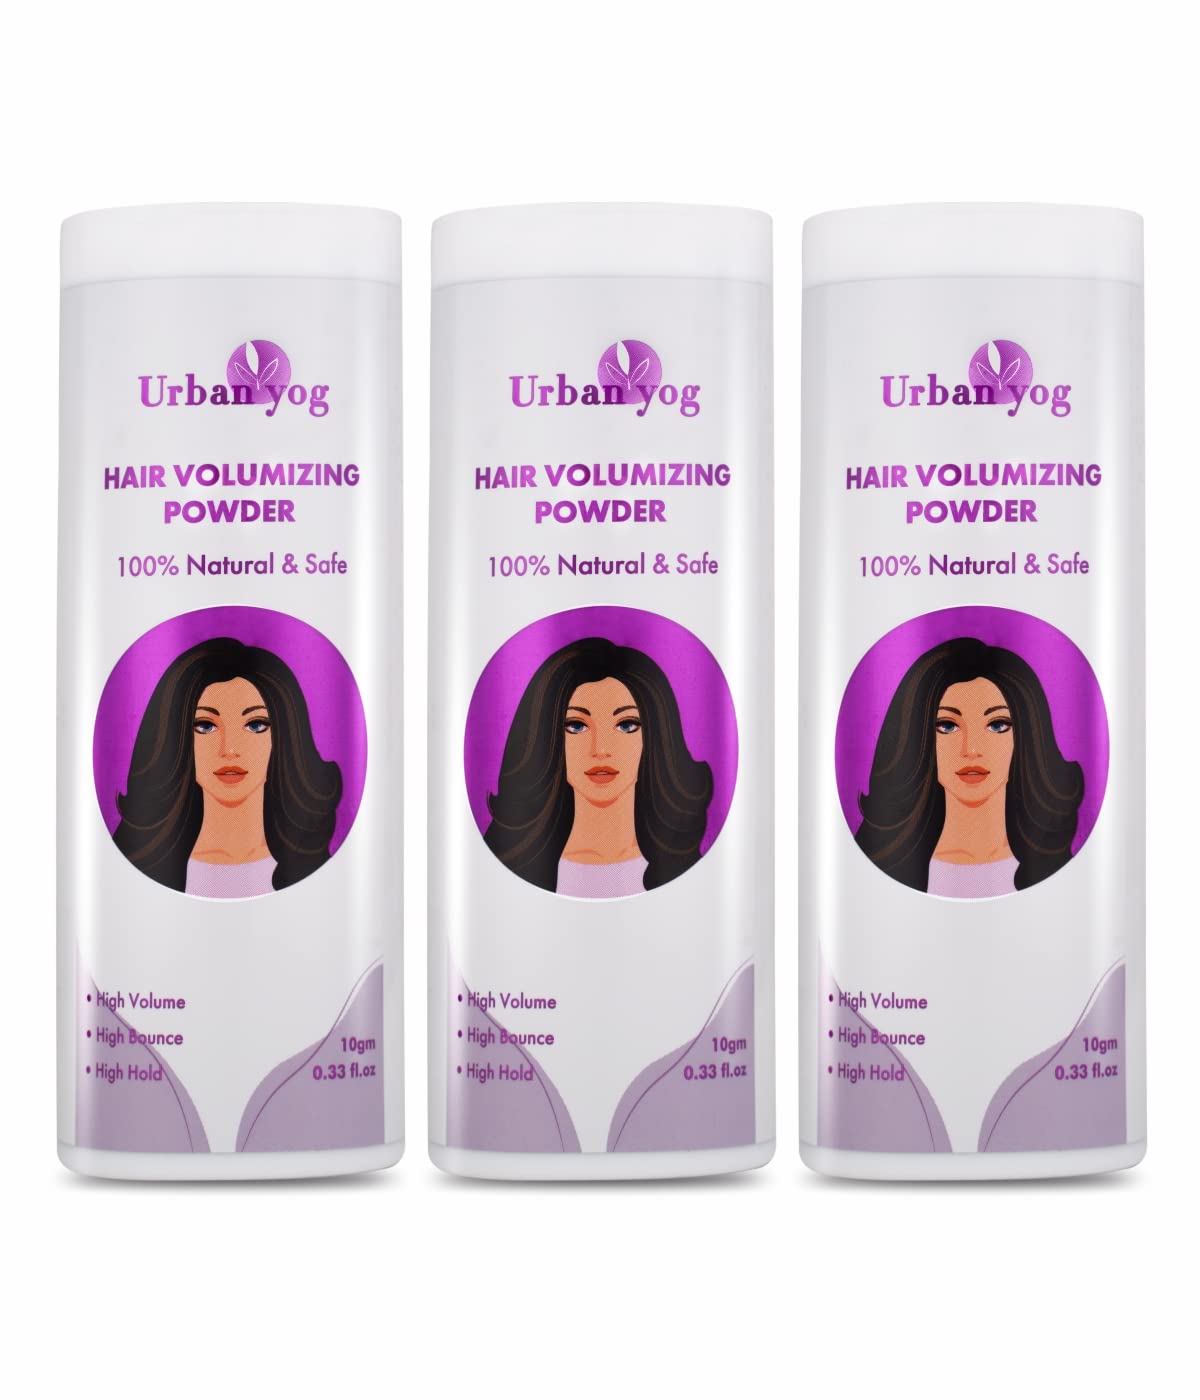 Urban Yog Hair Volumizing Powder for Women (10 Gm * 3 Units) (Pack of 3) | Adds Instant Volume and Locks Hairstyle